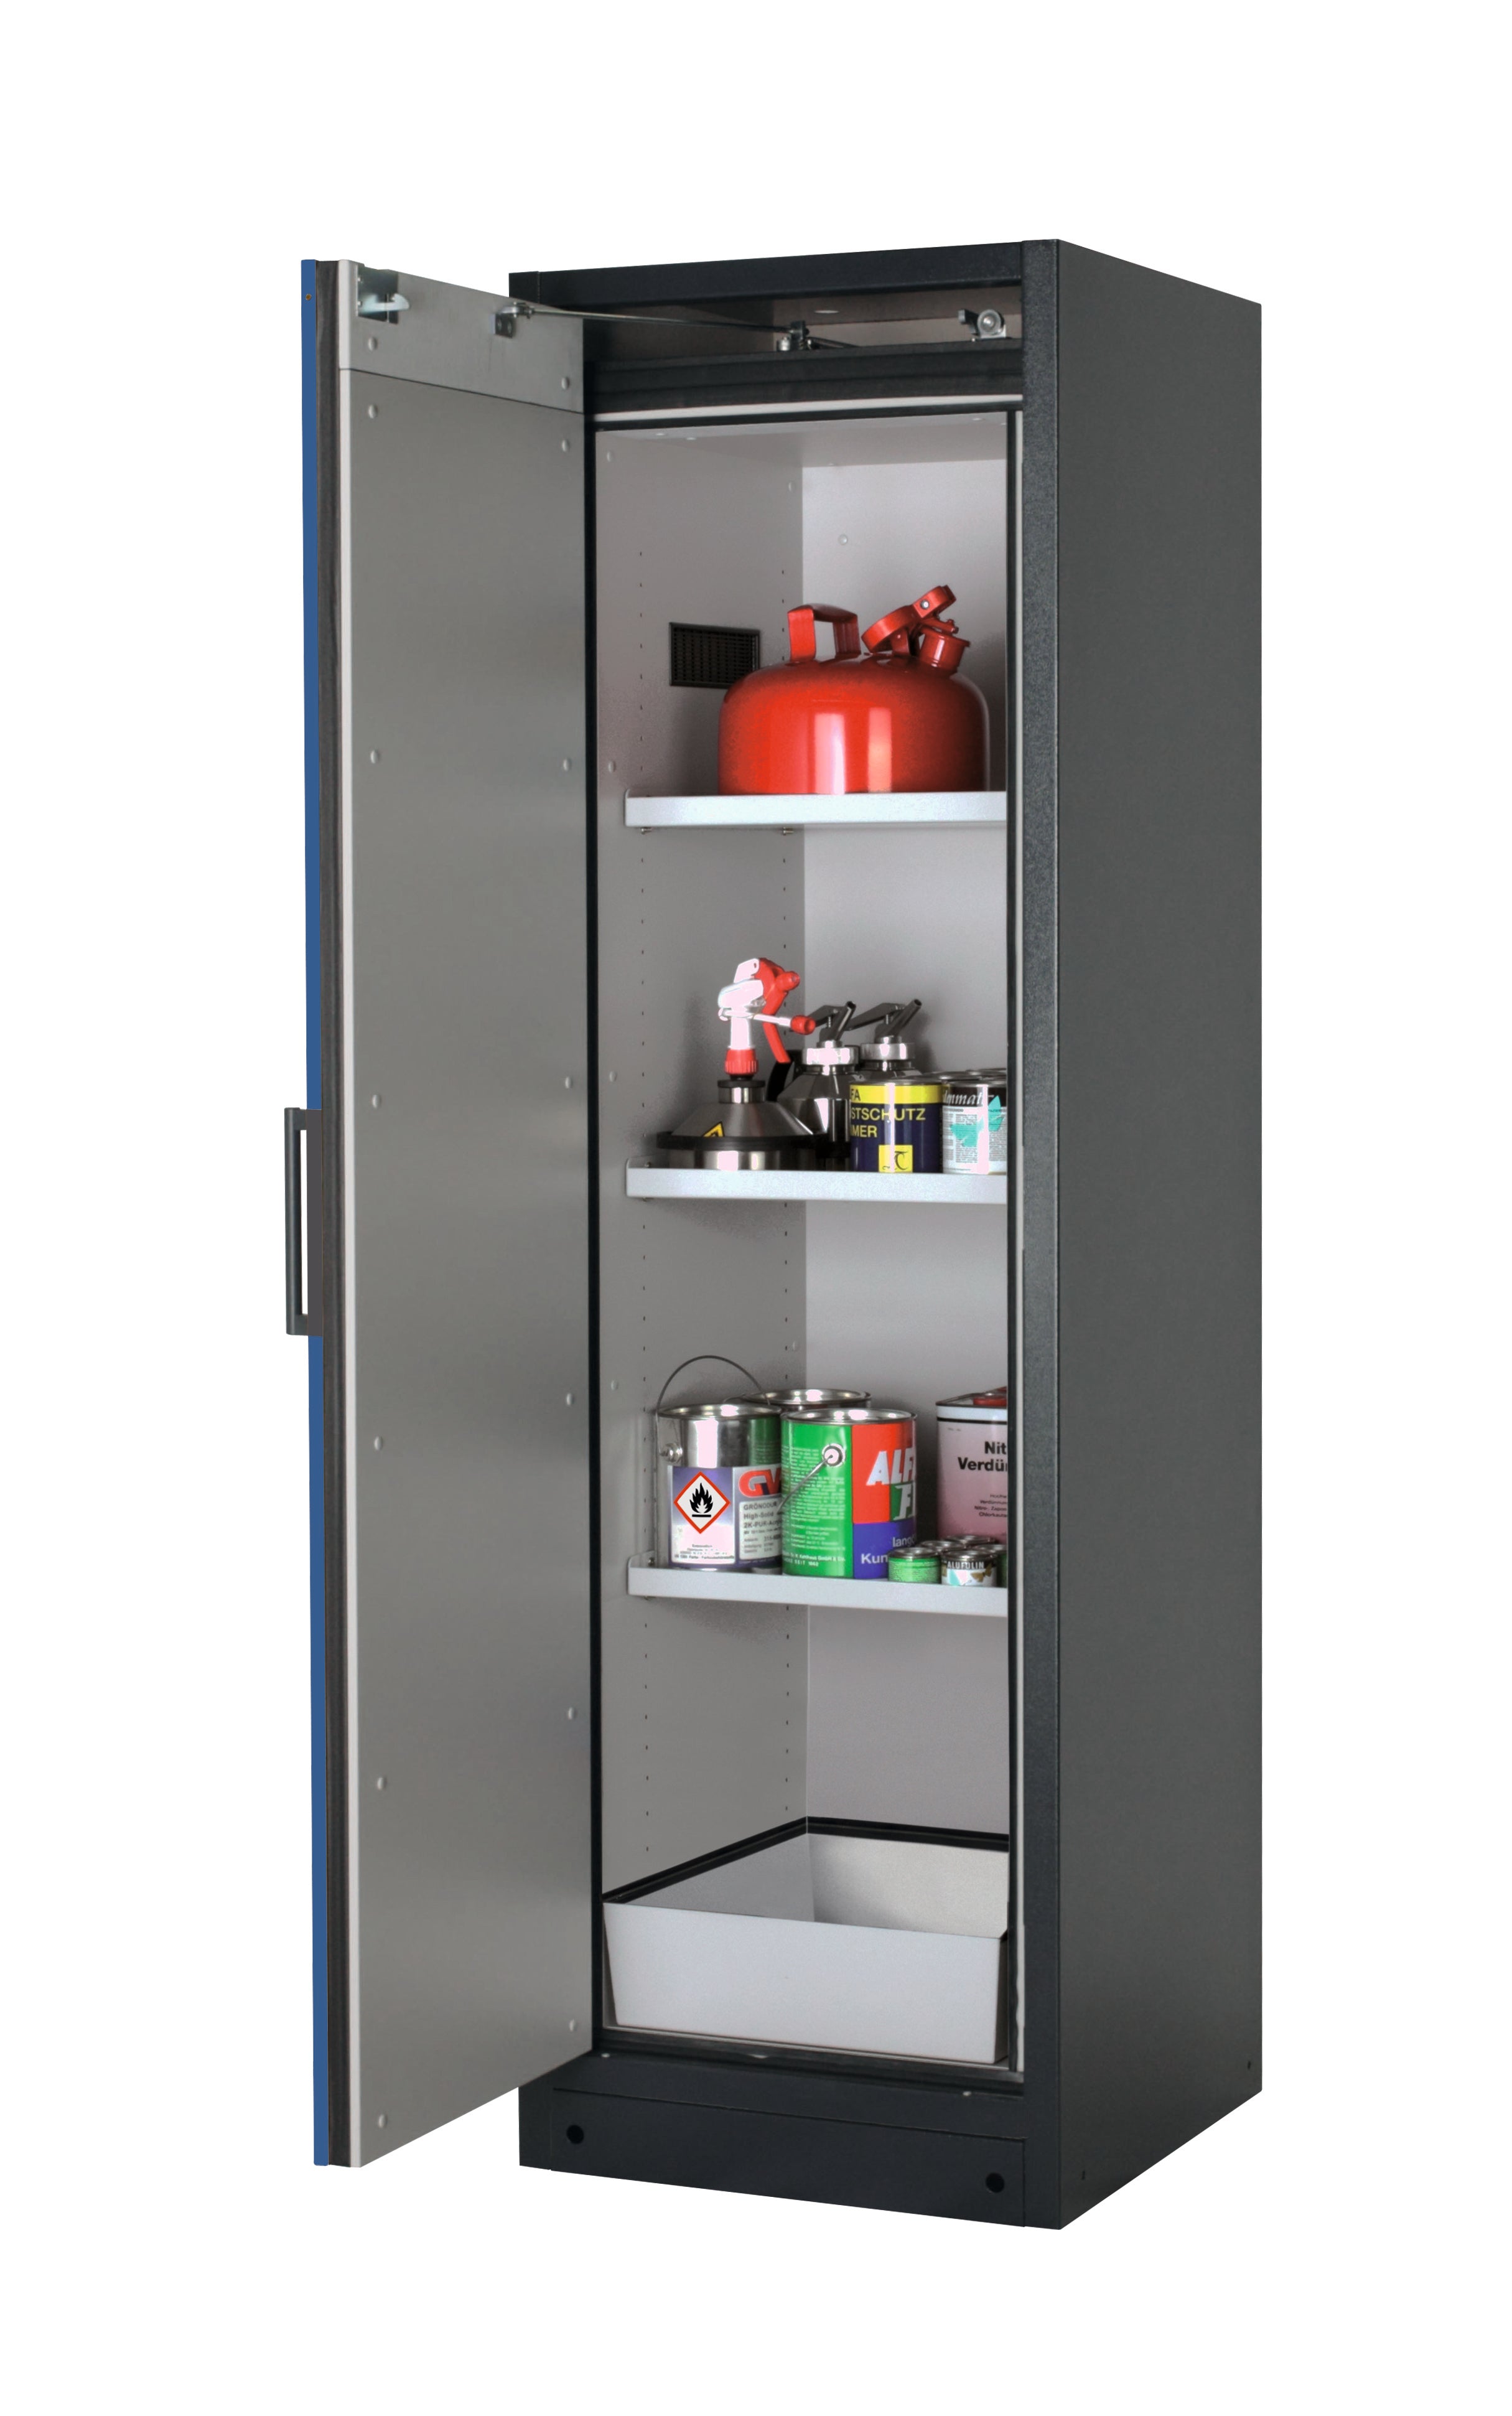 Type 90 safety storage cabinet Q-CLASSIC-90 model Q90.195.060 in gentian blue RAL 5010 with 3x shelf standard (sheet steel),